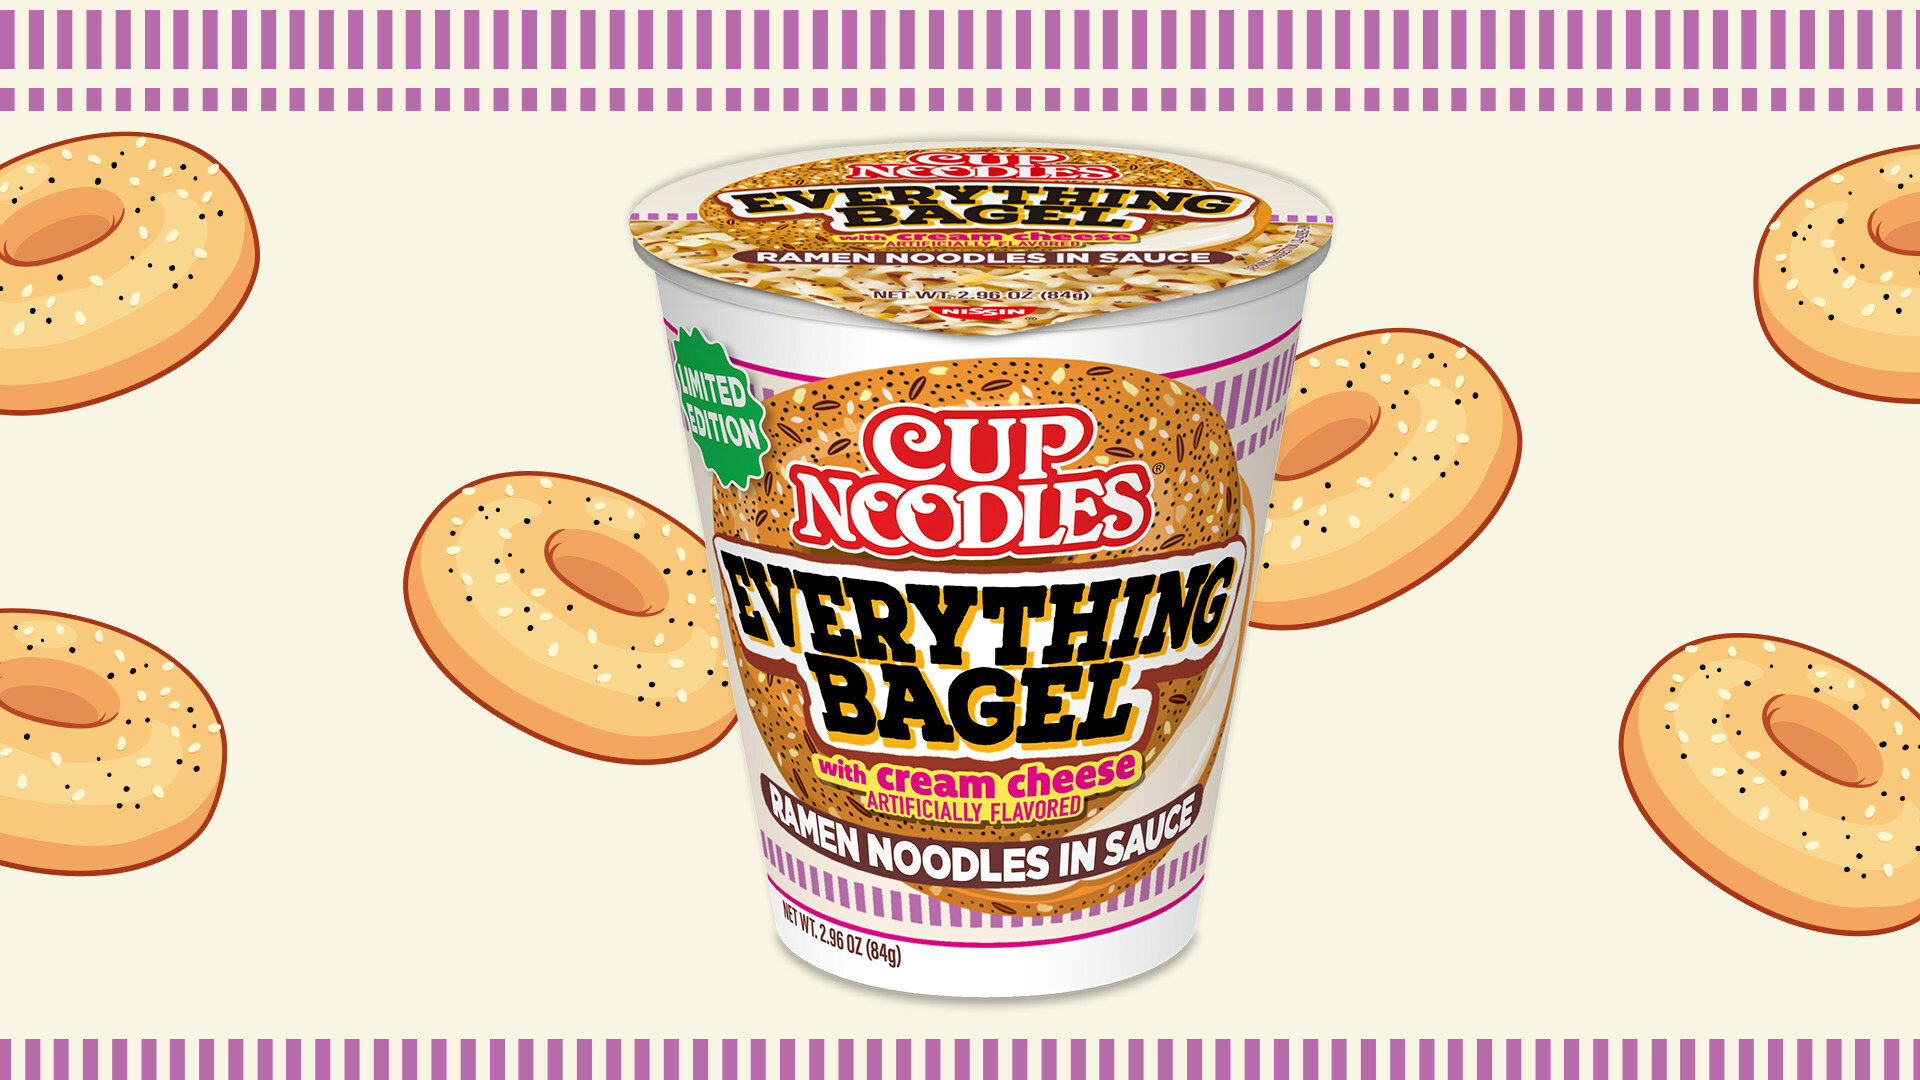 Nissin’s Cup Noodles Keeps Coming for Breakfast, Announces Everything Bagel and Cream Cheese Flavor